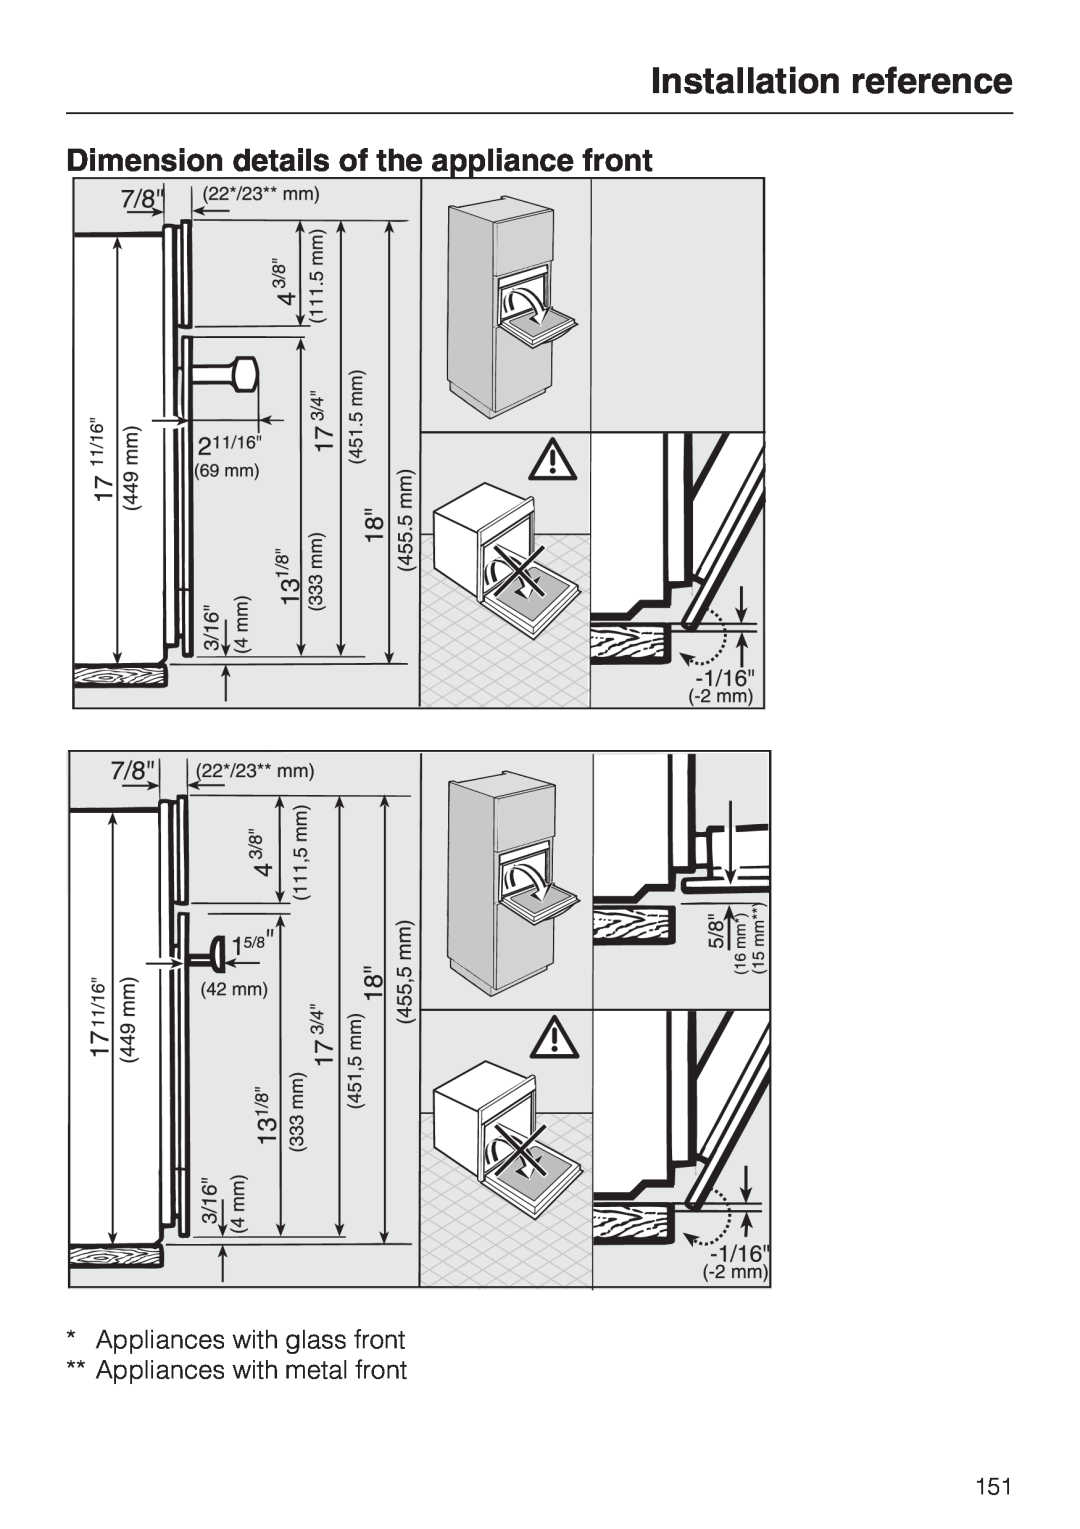 Miele 09 855 050 installation instructions Installation reference, Dimension details of the appliance front 